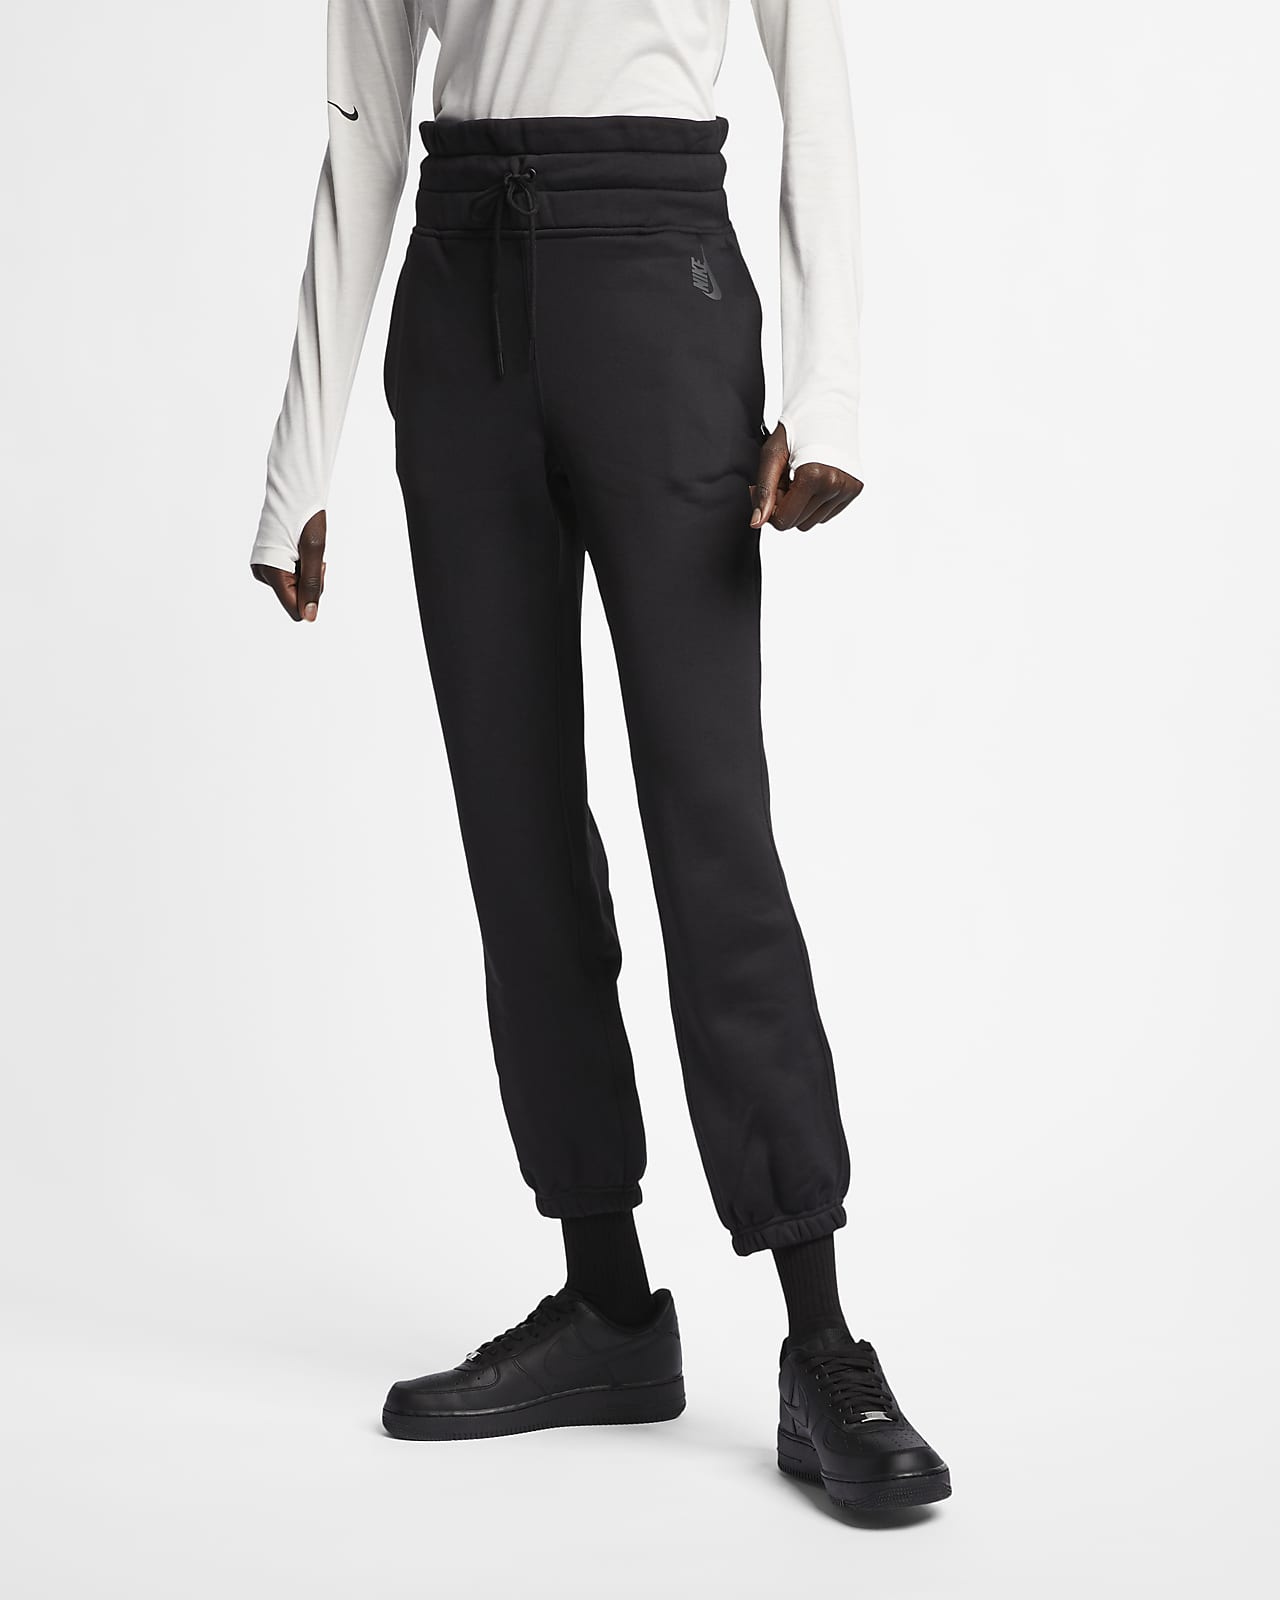 https://static.nike.com/a/images/t_PDP_1280_v1/f_auto,q_auto:eco/ty2fjniofbnyz6s03xwq/nikelab-collection-womens-high-rise-fleece-pants-dnSsdZ.png